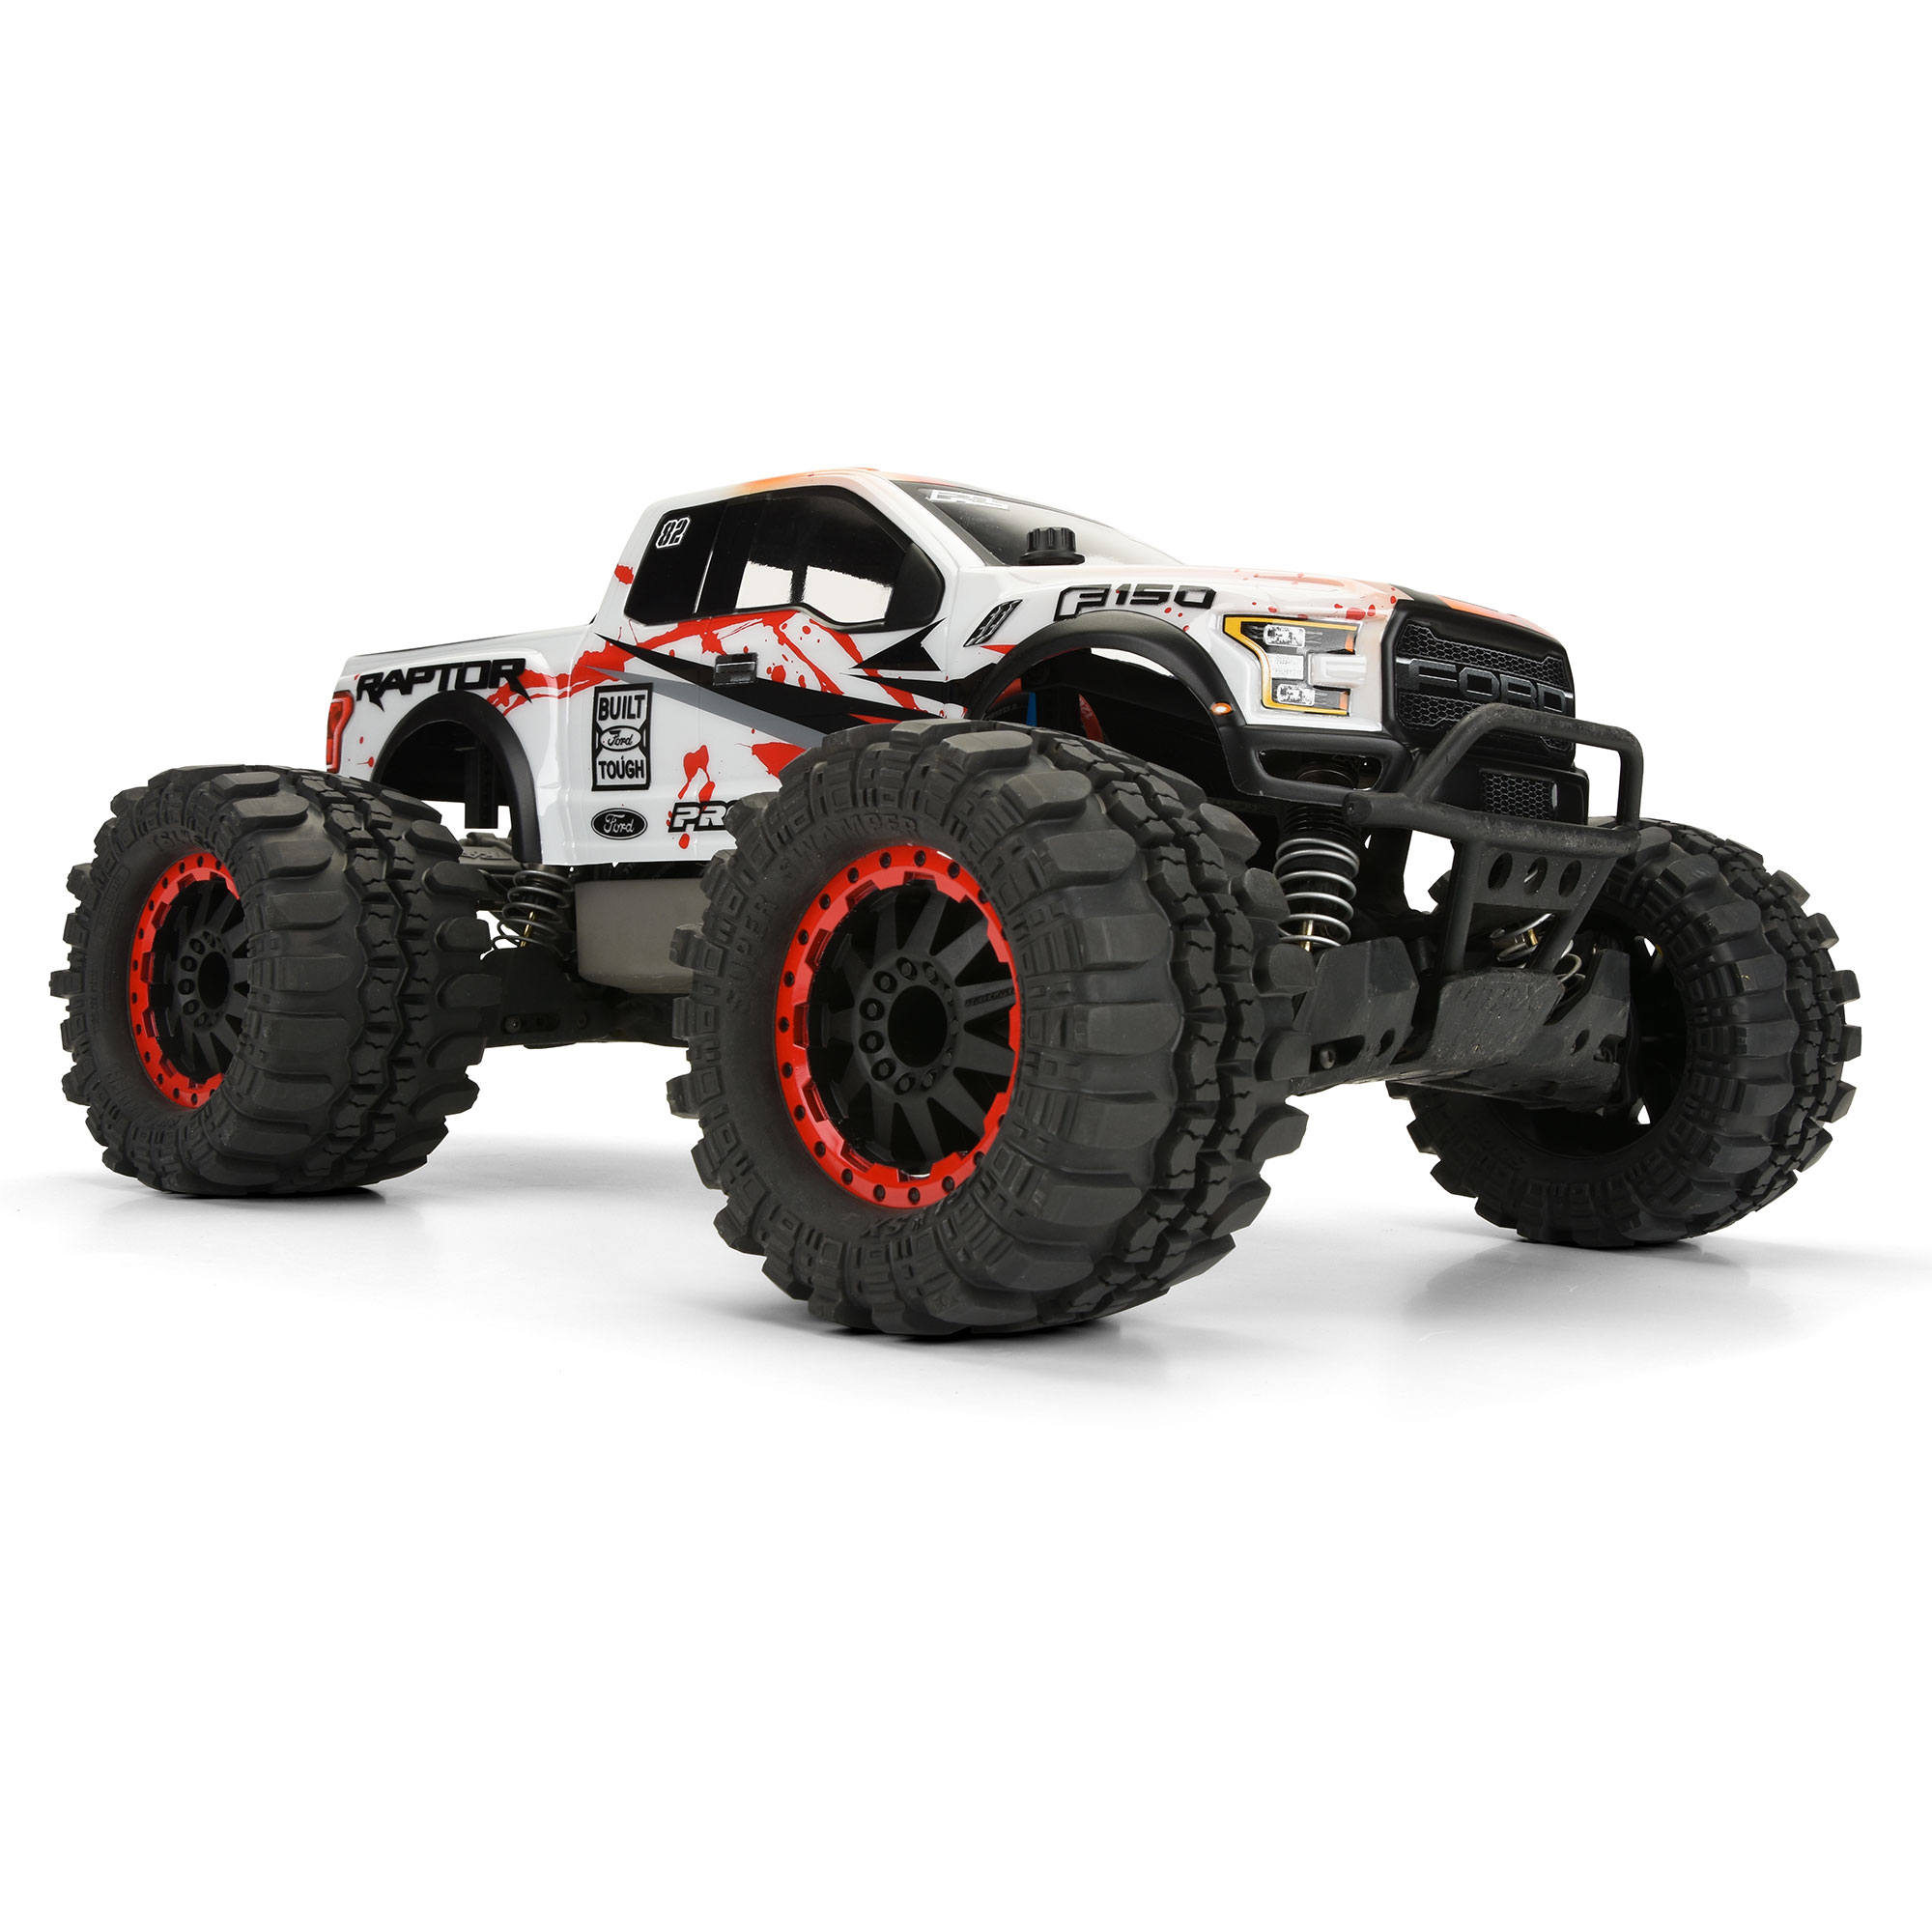 PRO3470-00 Pro-Line Racing 2017 Ford F-150 Raptor Clear Body pour Stampede 